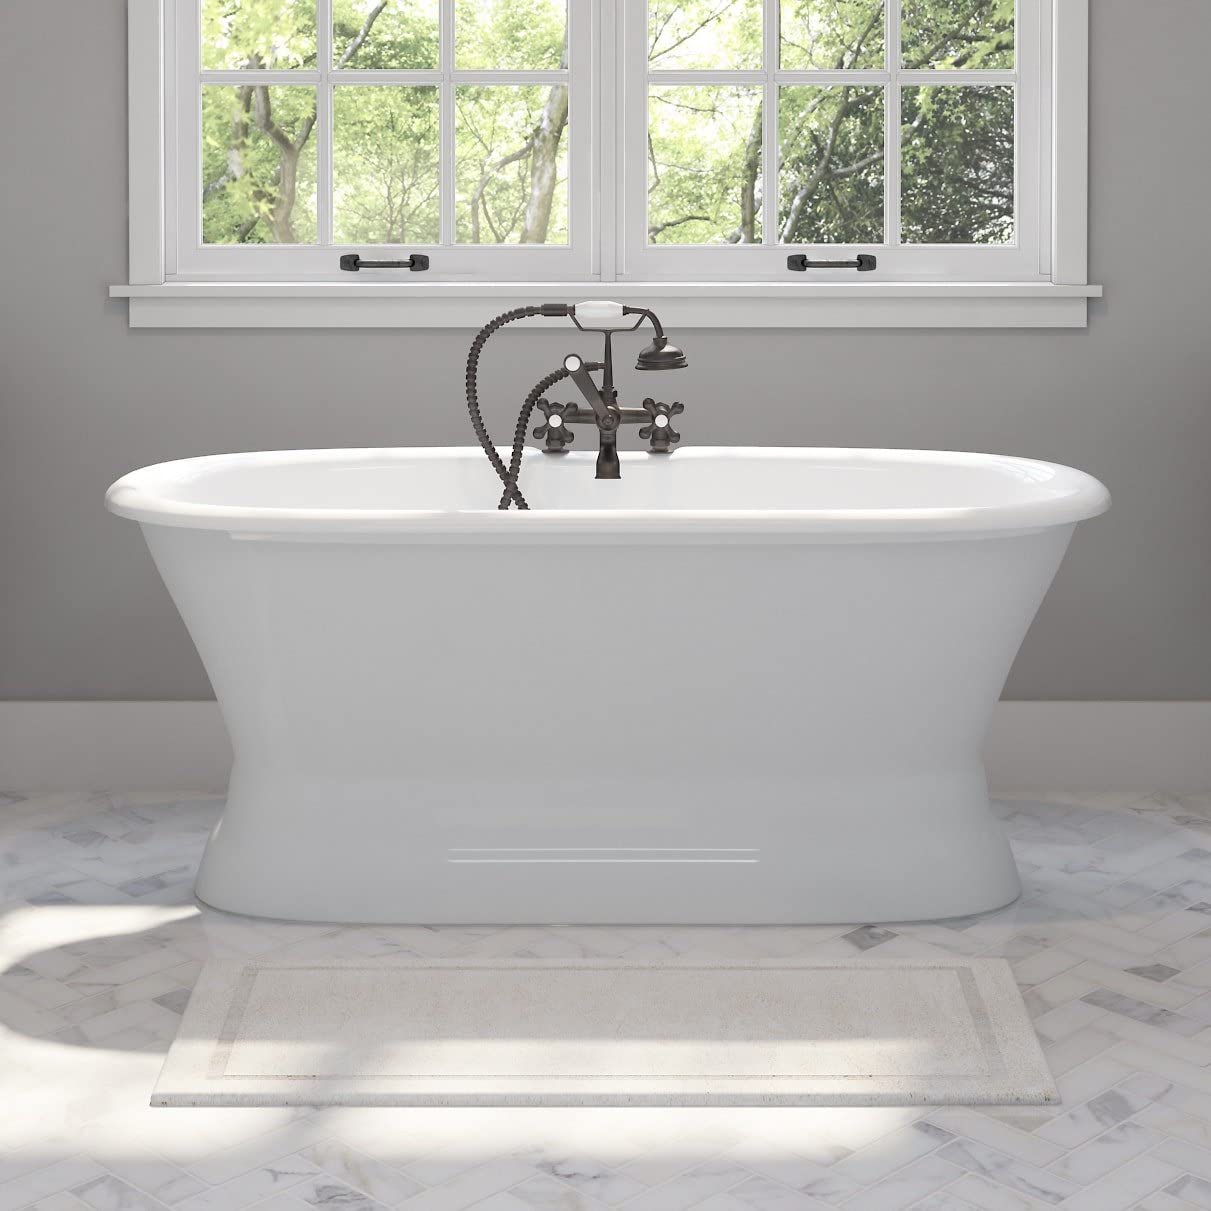 The Tub Connection 60 Cast Iron Double Ended Pedestal Tub